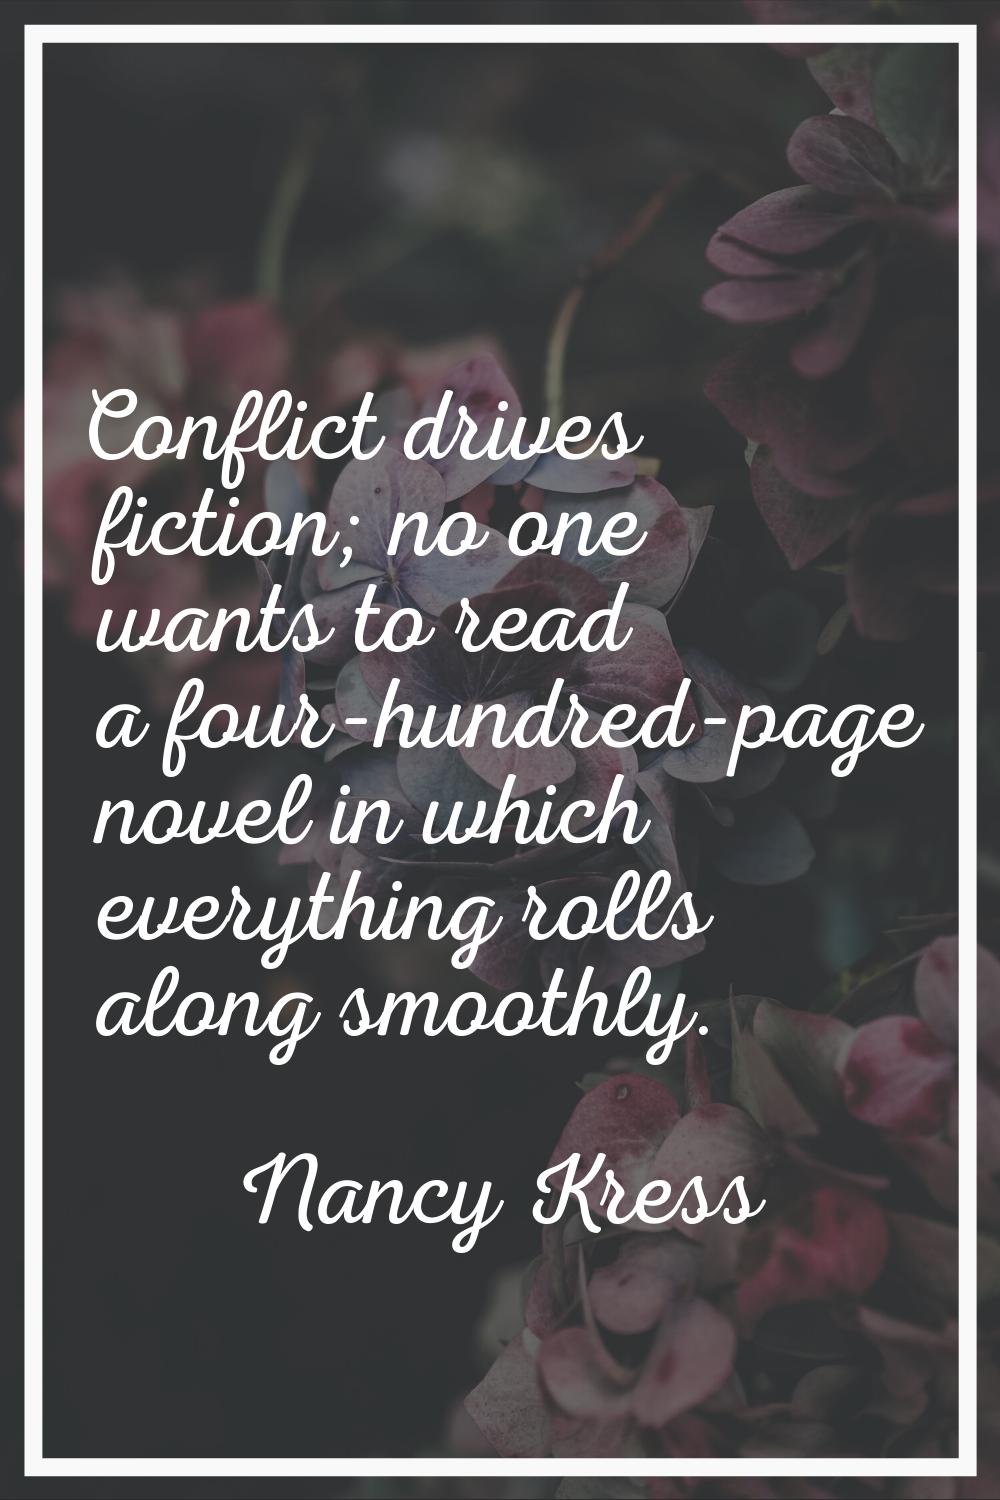 Conflict drives fiction; no one wants to read a four-hundred-page novel in which everything rolls a